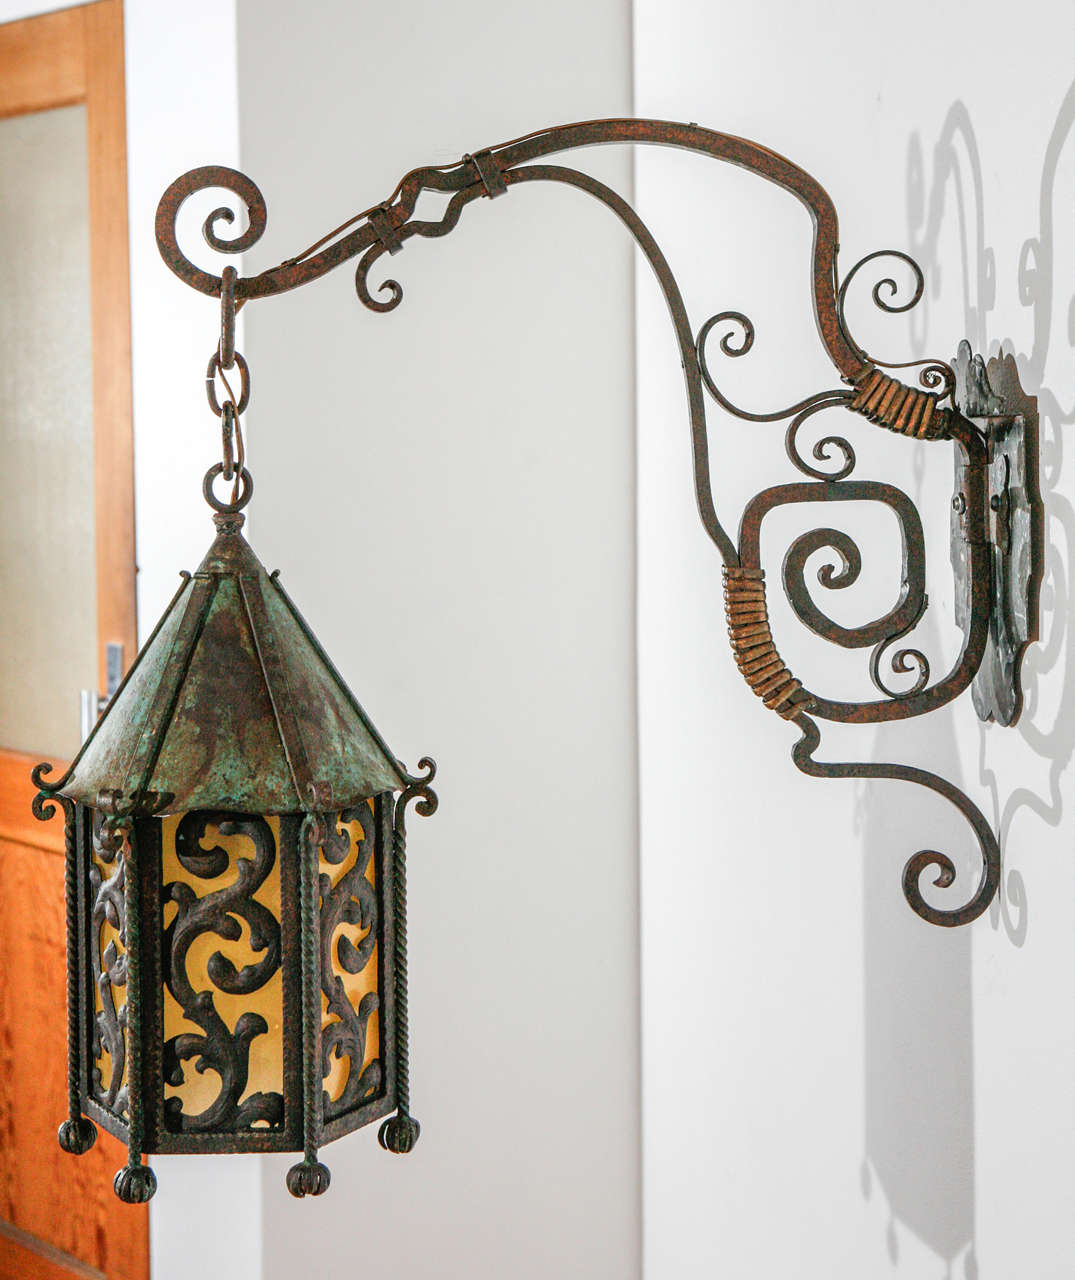 Massive exterior iron sconce with beautiful brass detailing.